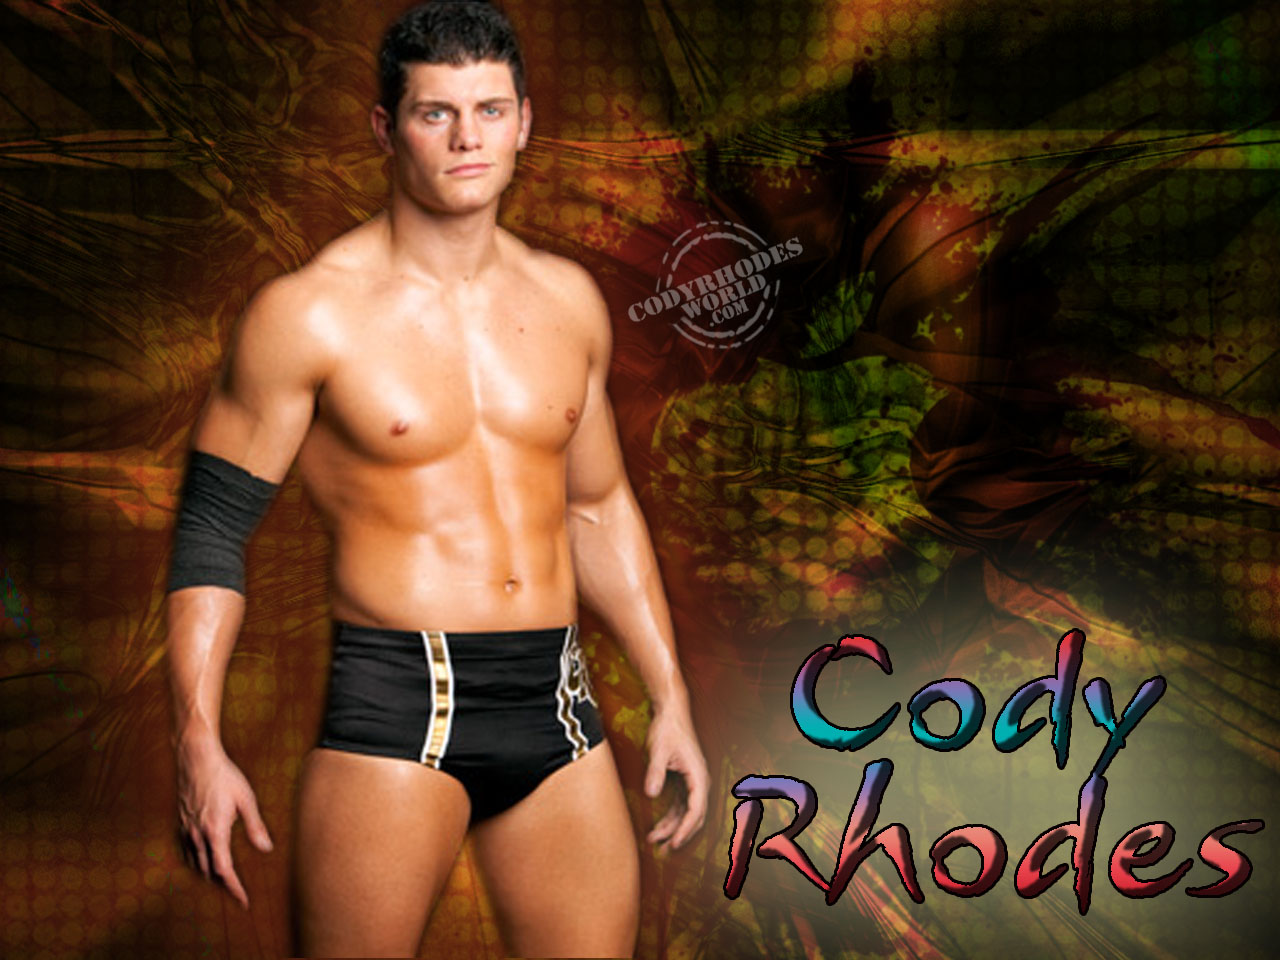 Cody Rhodes: 494,500 downside 3 year contract